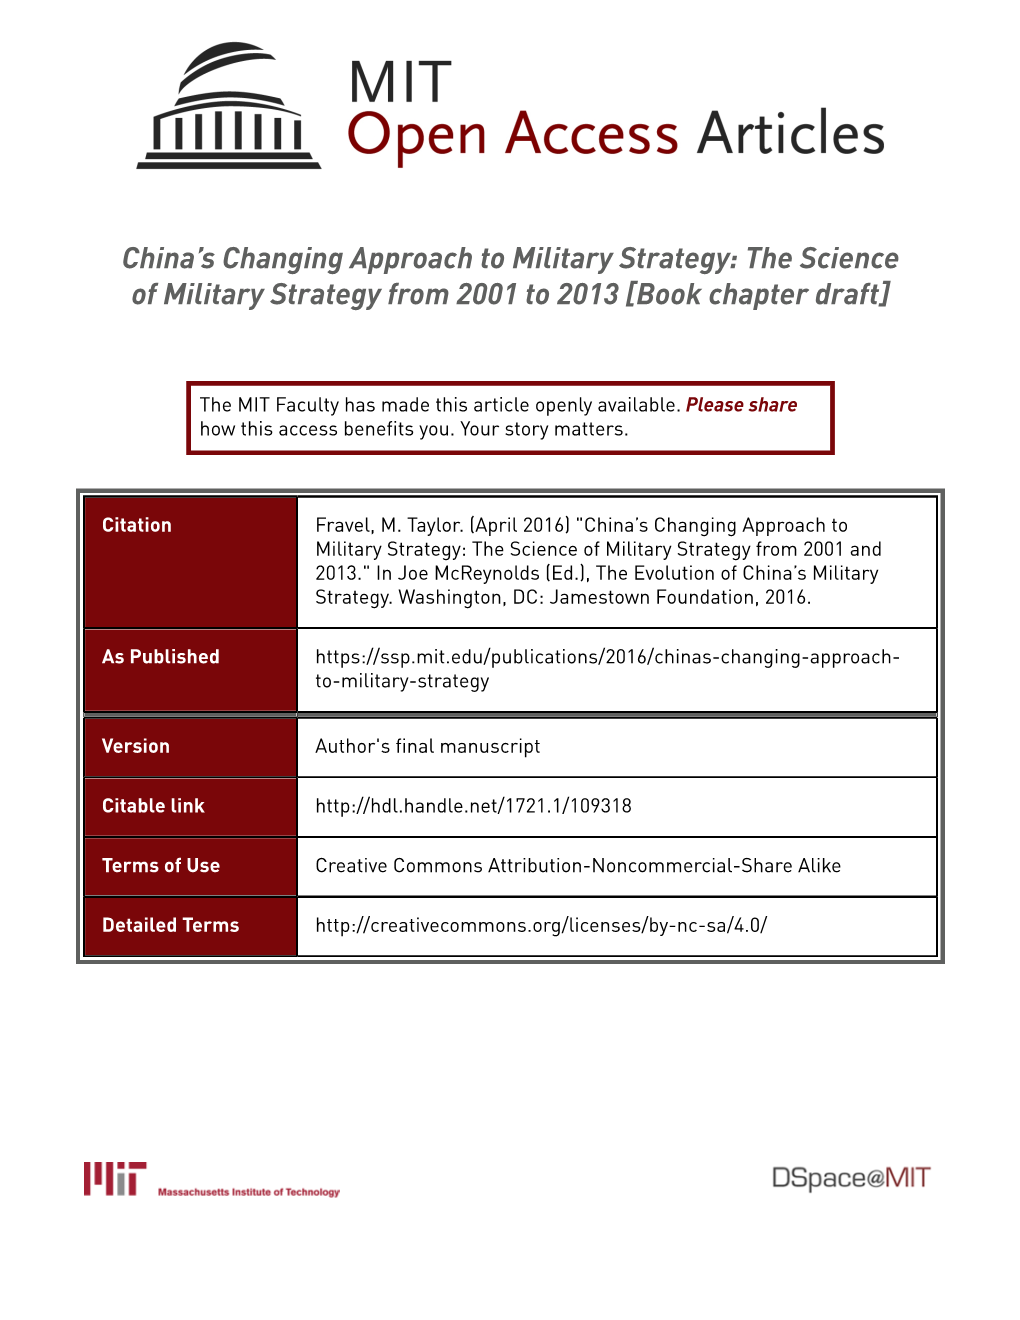 The Science of Military Strategy from 2001 to 2013 [Book Chapter Draft]